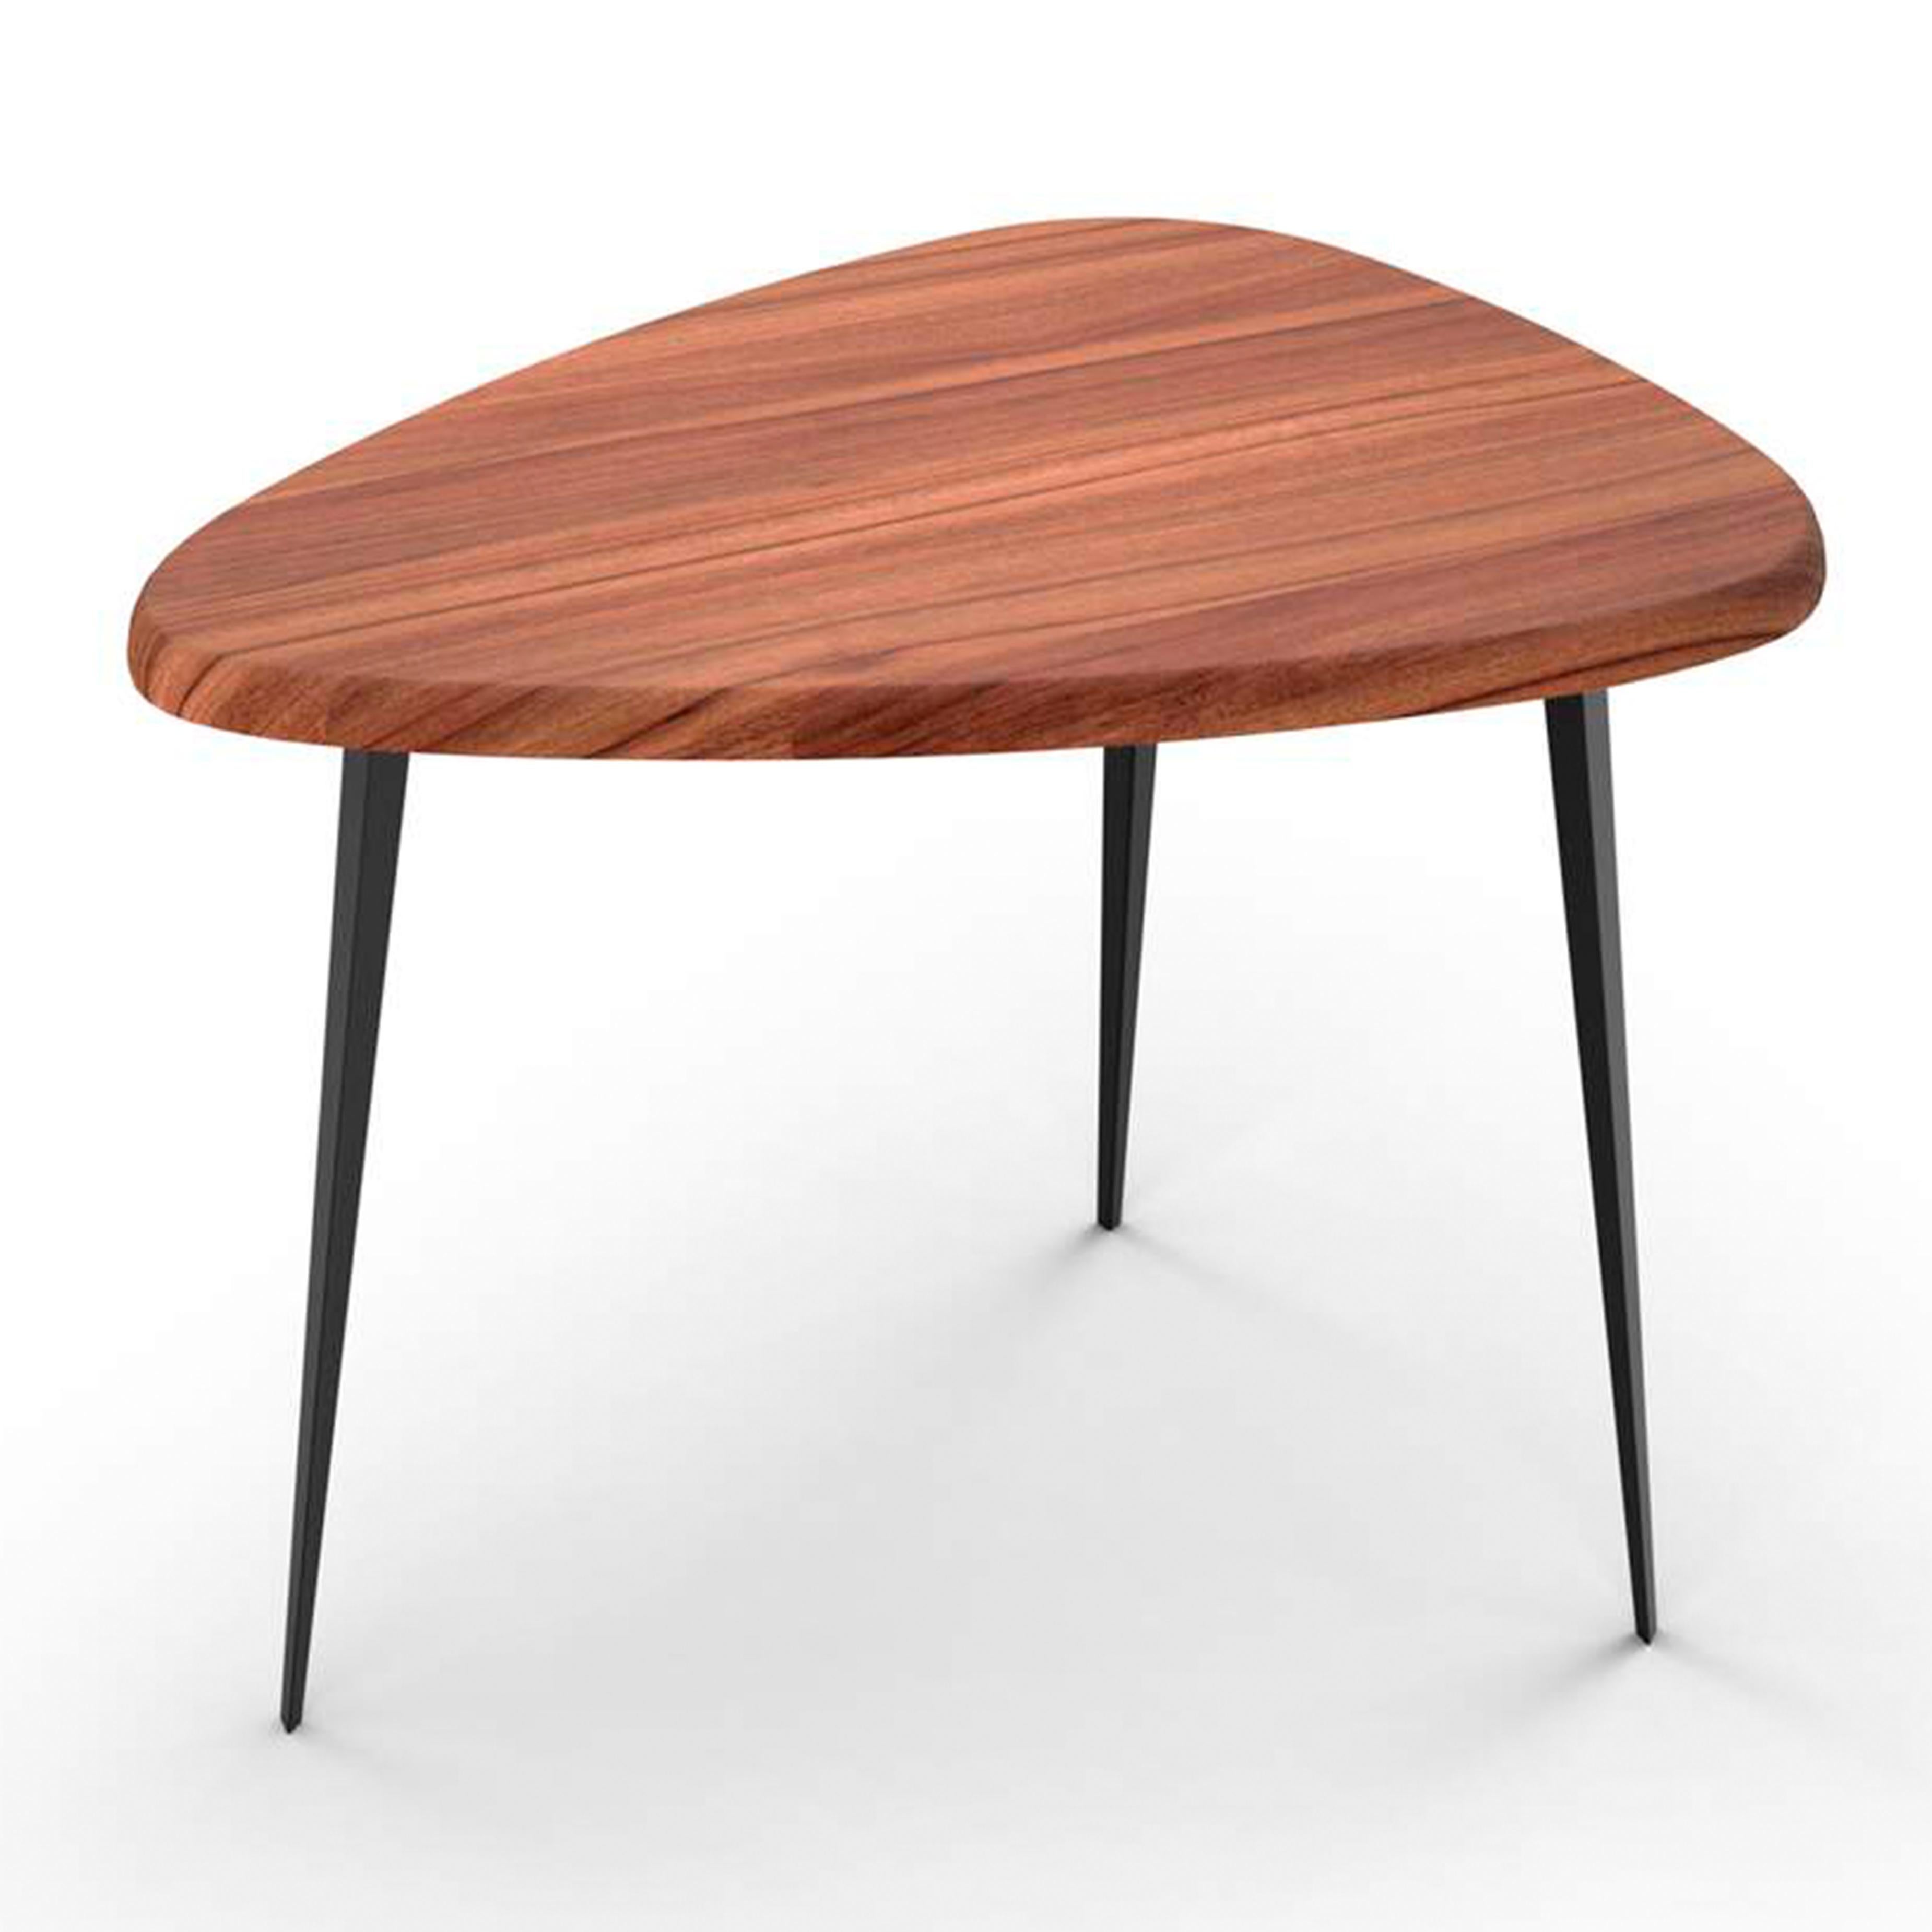 The structure of these bar tables by Charlotte Perriand is designed to occupy as little space as possible. They can be grouped together to furnish lounge bars and waiting rooms. 

The wood top of this bar table is extra thick and is available in